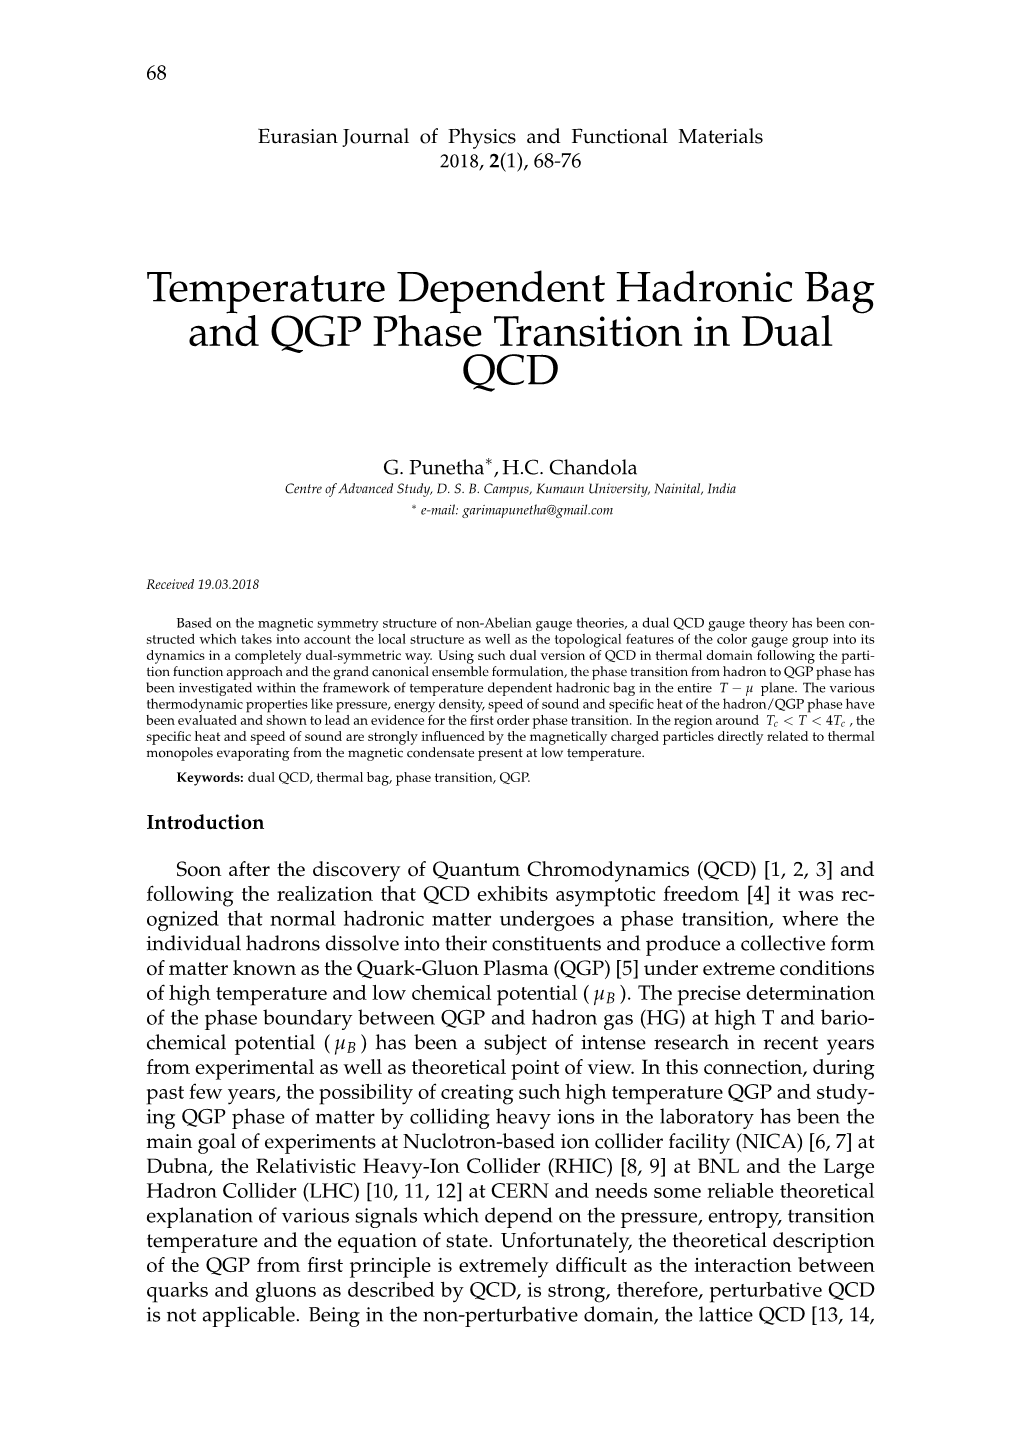 Temperature Dependent Hadronic Bag and QGP Phase Transition in Dual QCD